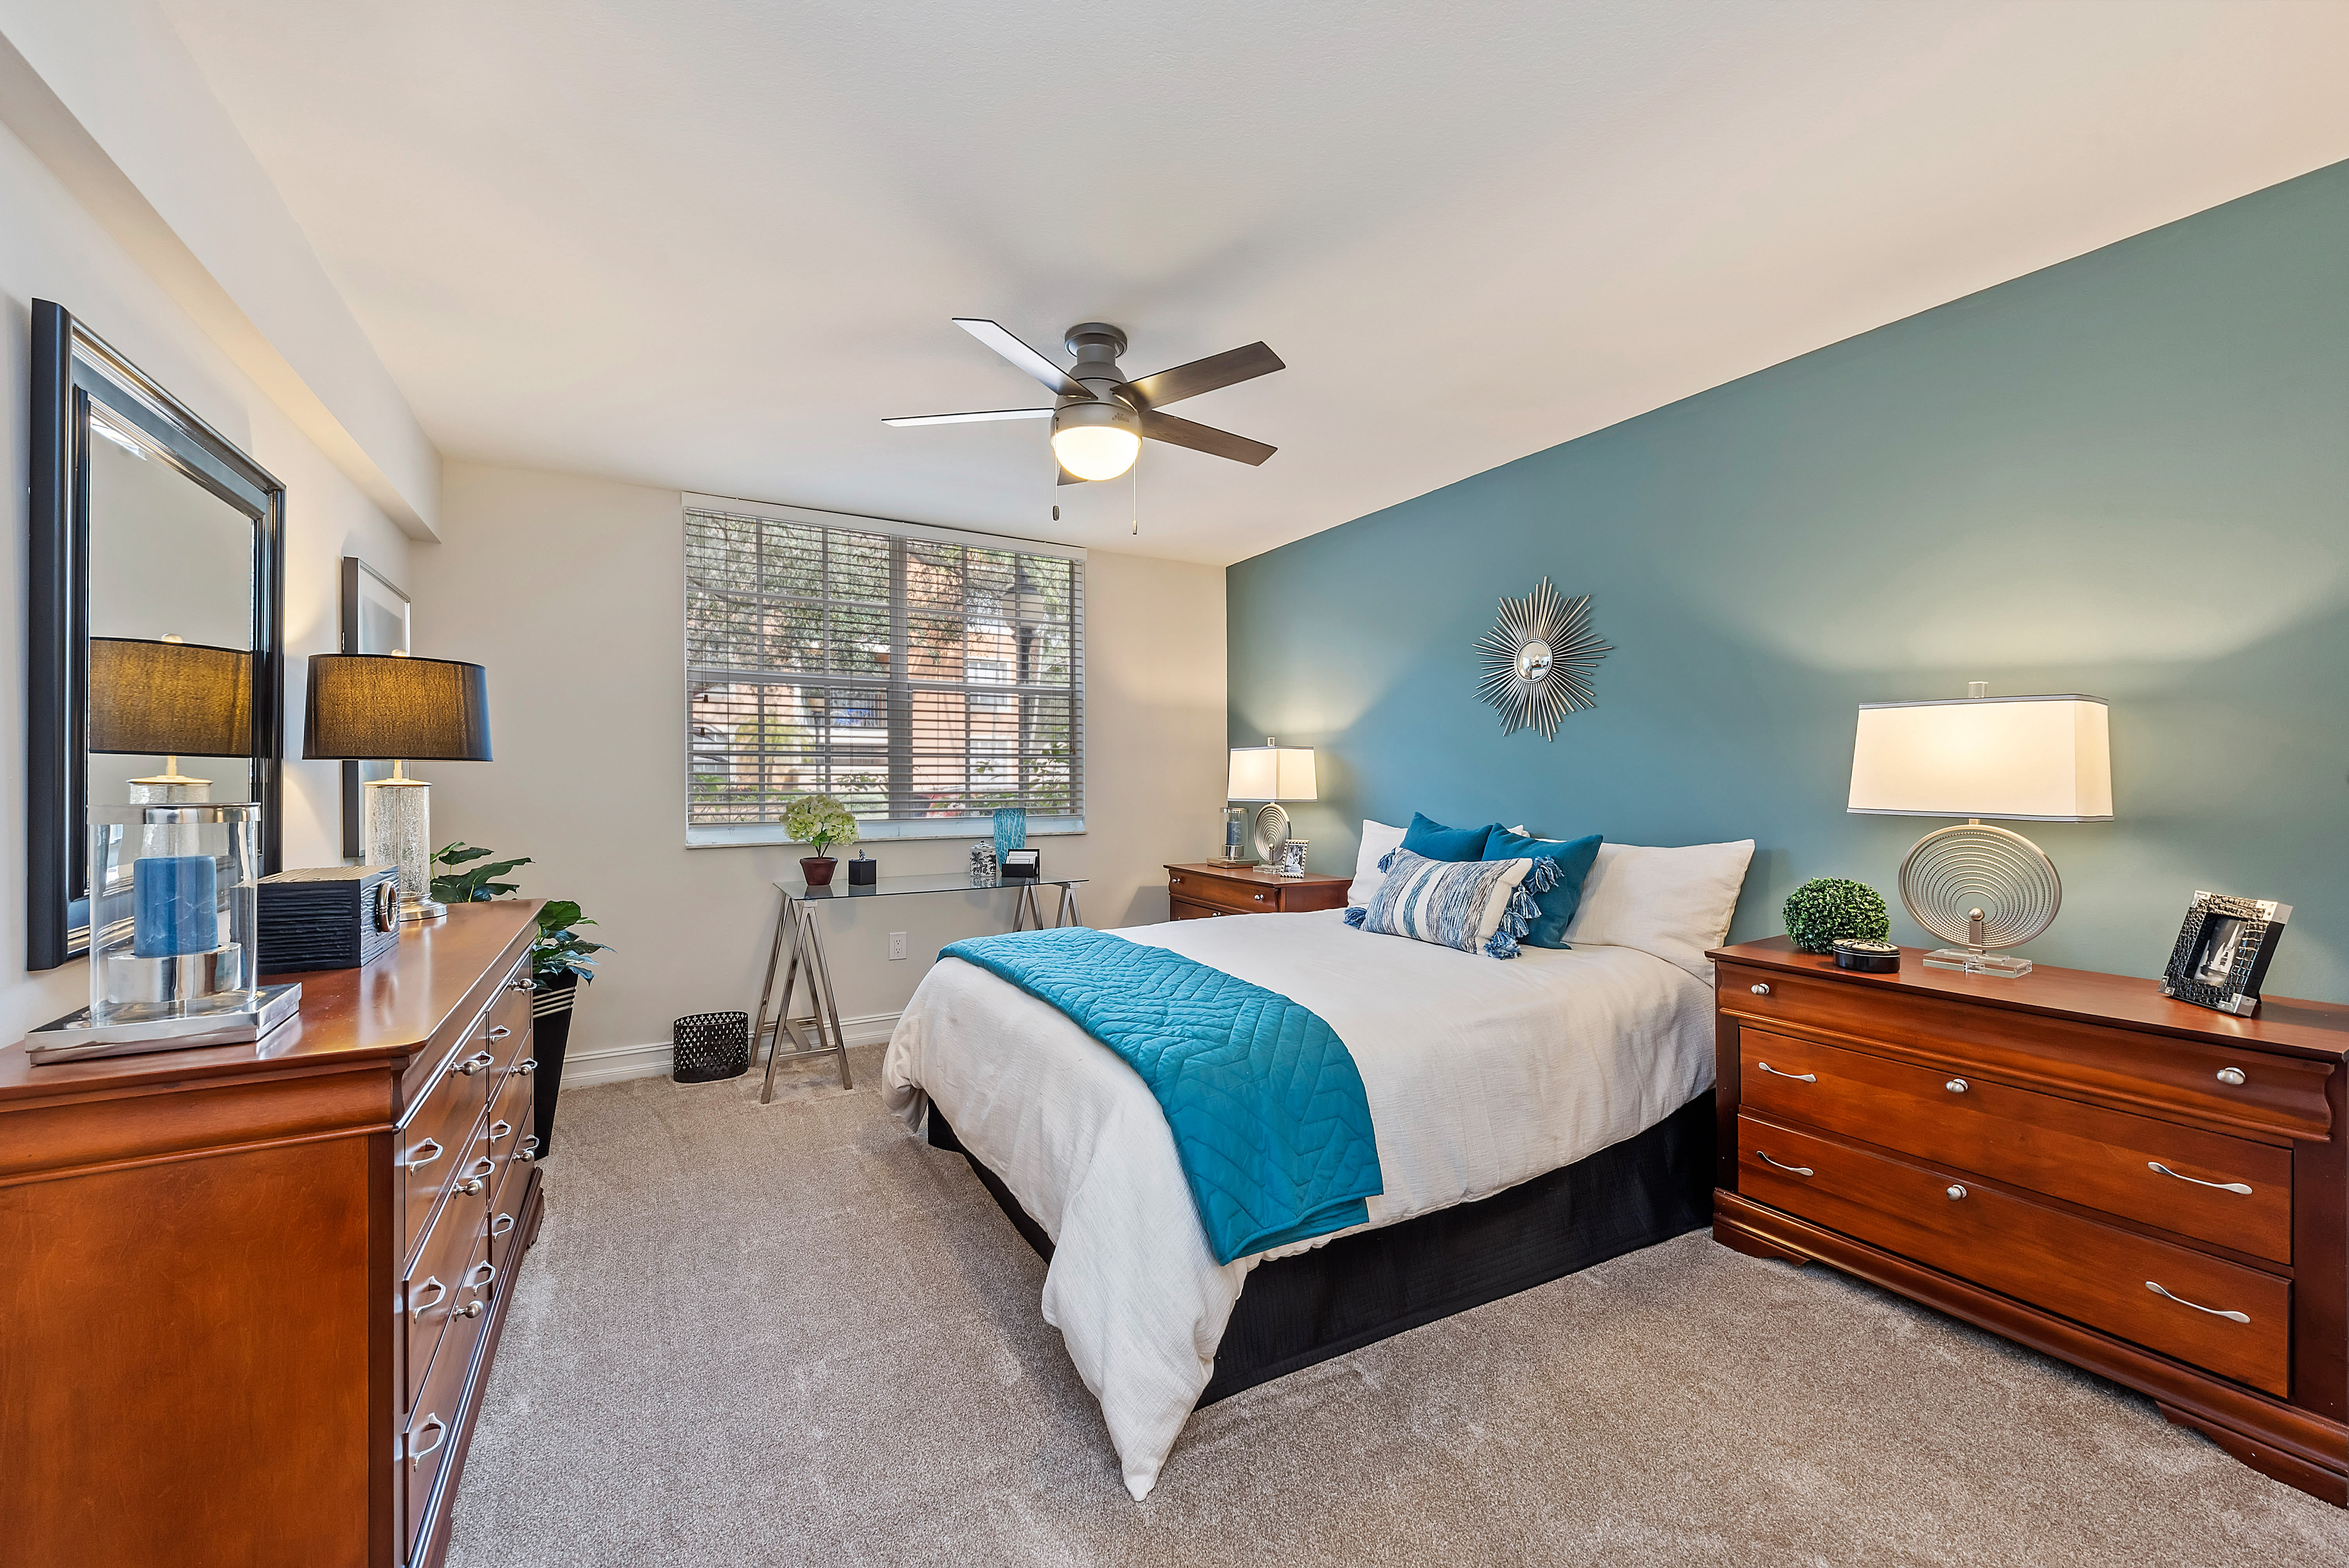 Fully furnished model bedroom with ceiling fan at Crescent House Apartments in Miami Lakes, Florida